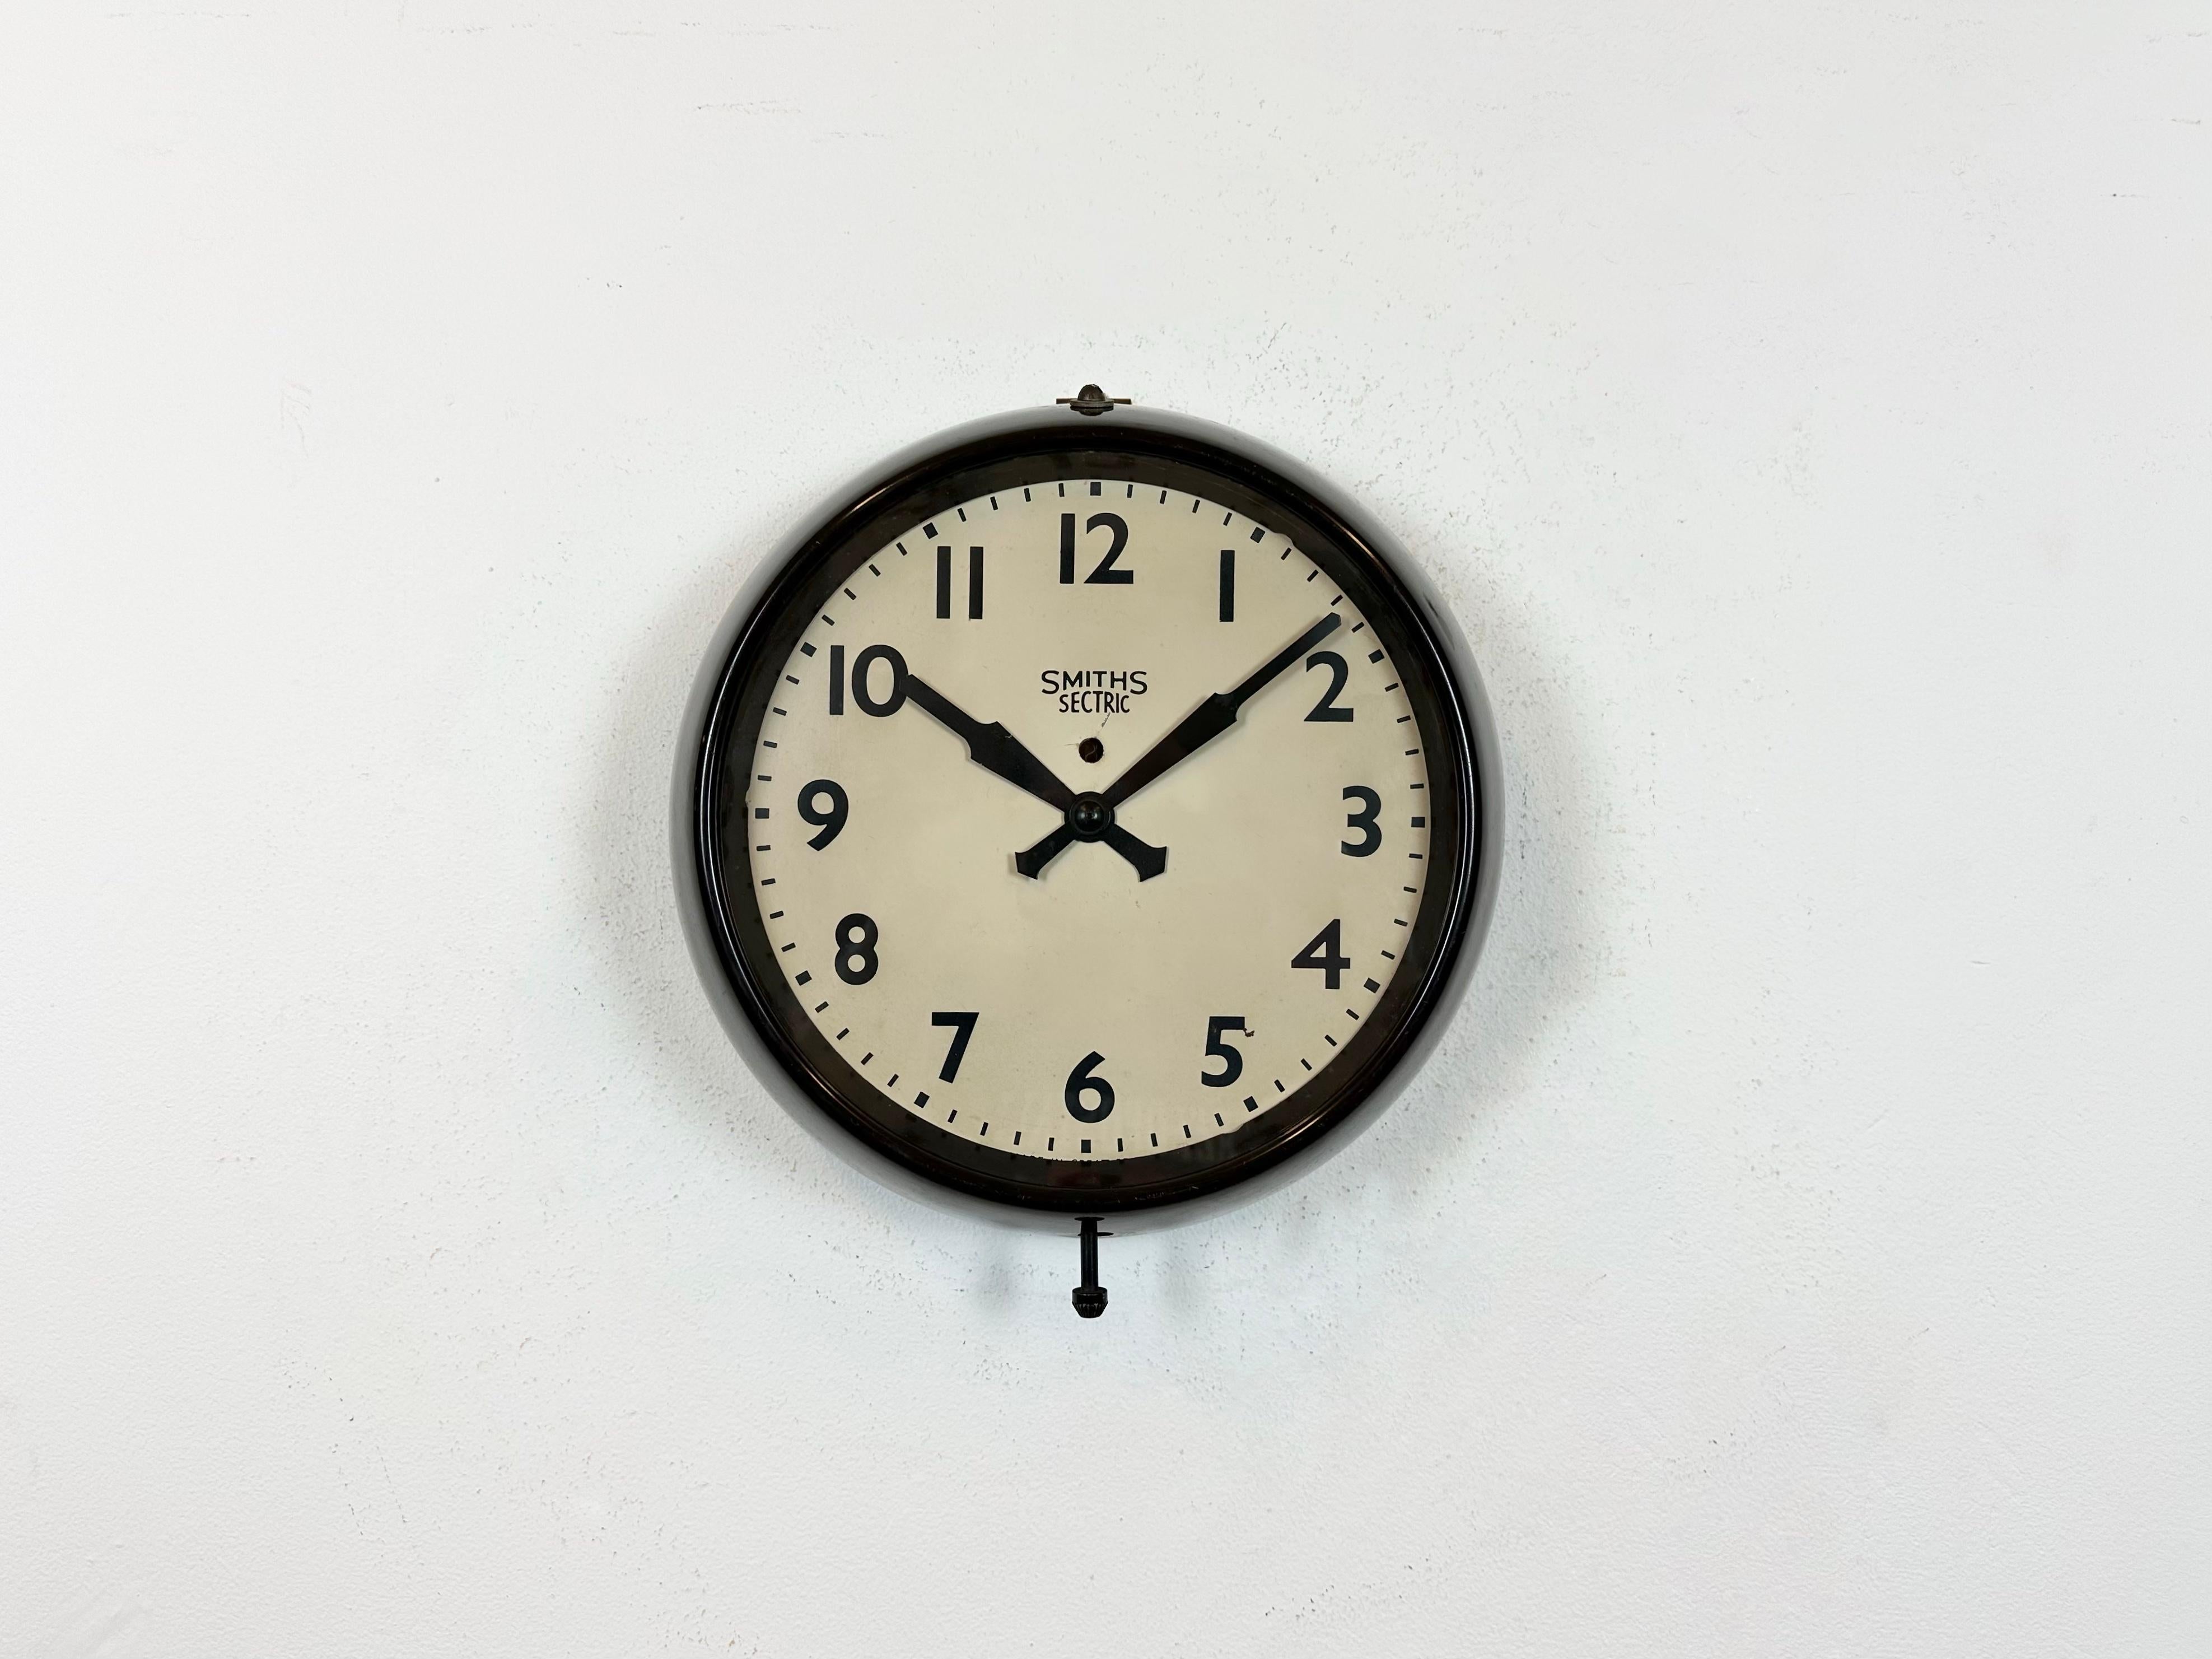 Smiths Sectric wall clock was made in United Kingdom during the 1950s. It features a dark brown bakelite frame, an iron dial with aluminium hands and a clear glass cover. Original electric movement ( 220 V ) works perfectly . The diameter of the